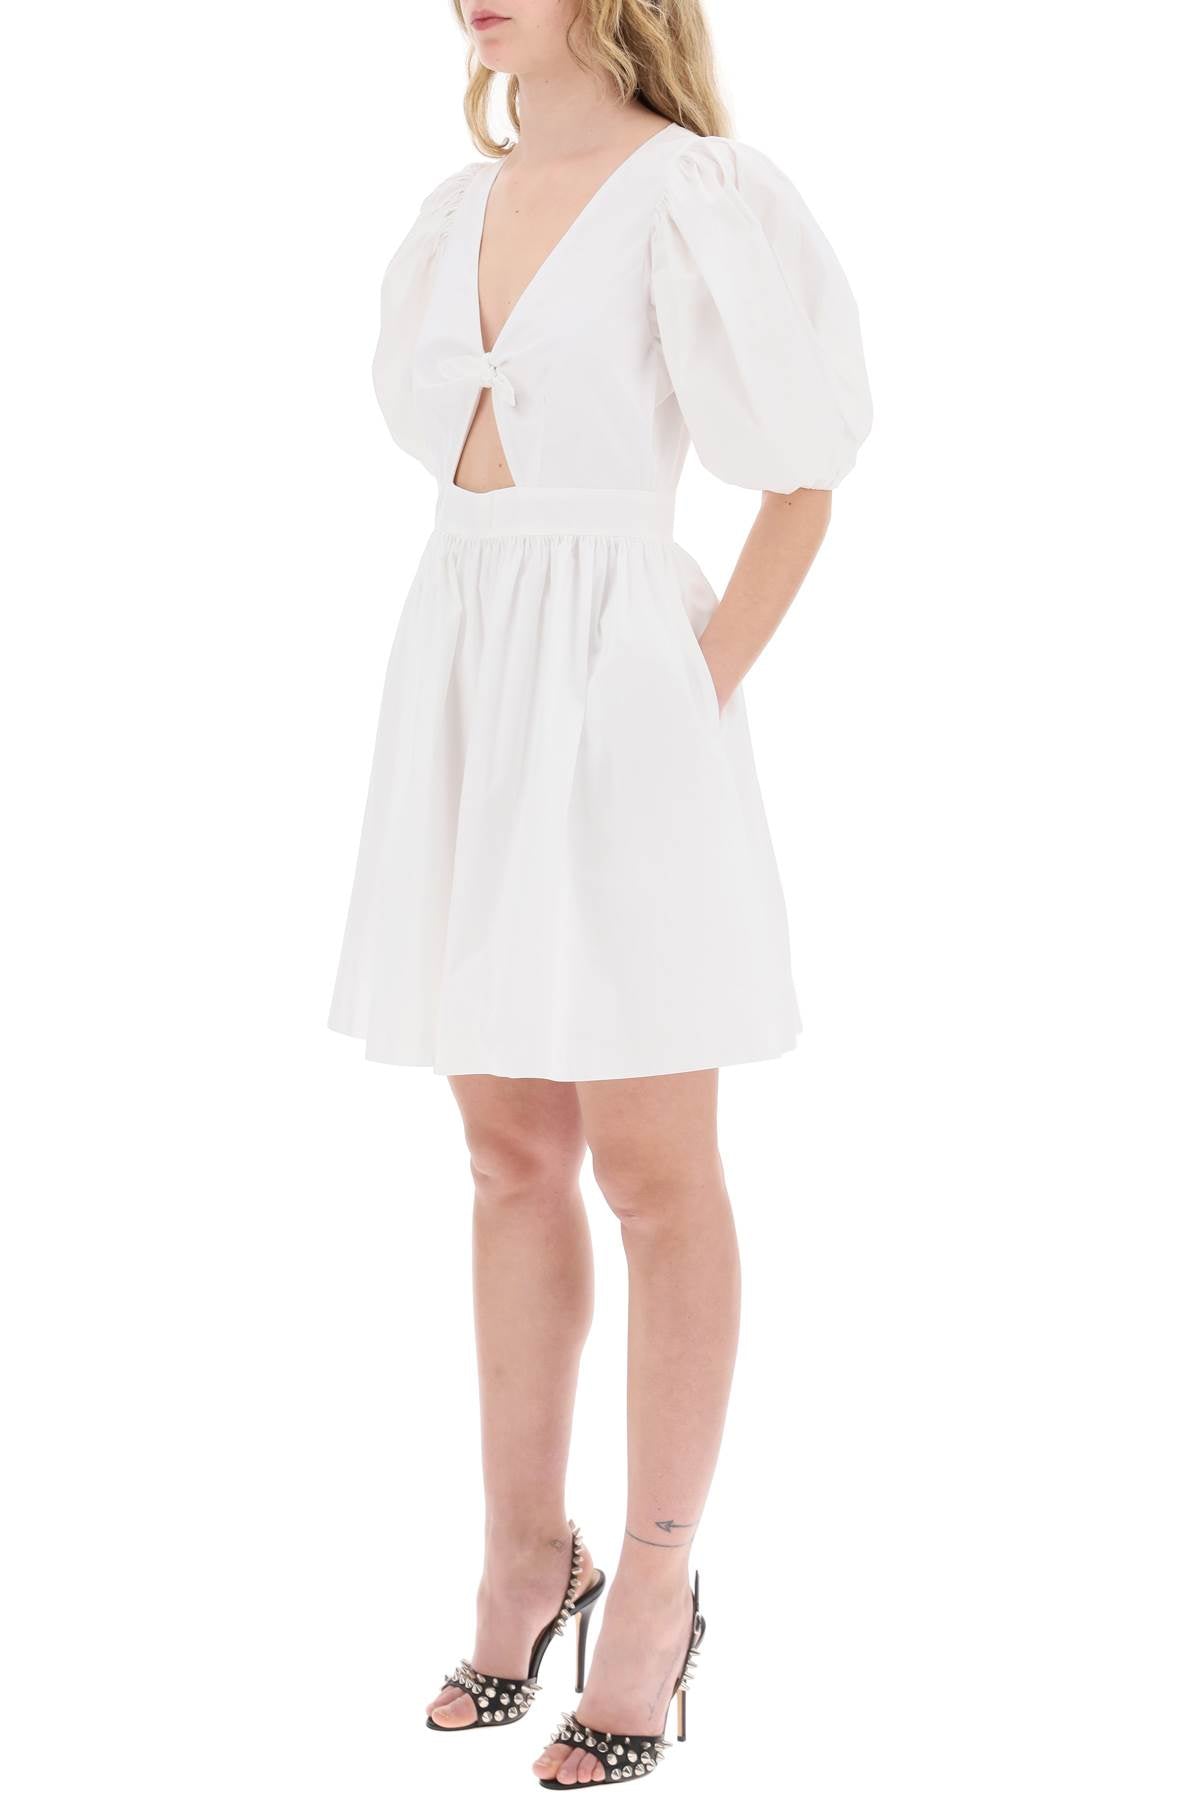 Rotate mini dress with balloon sleeves and cut-out details-women > clothing > dresses > mini-Rotate-Urbanheer